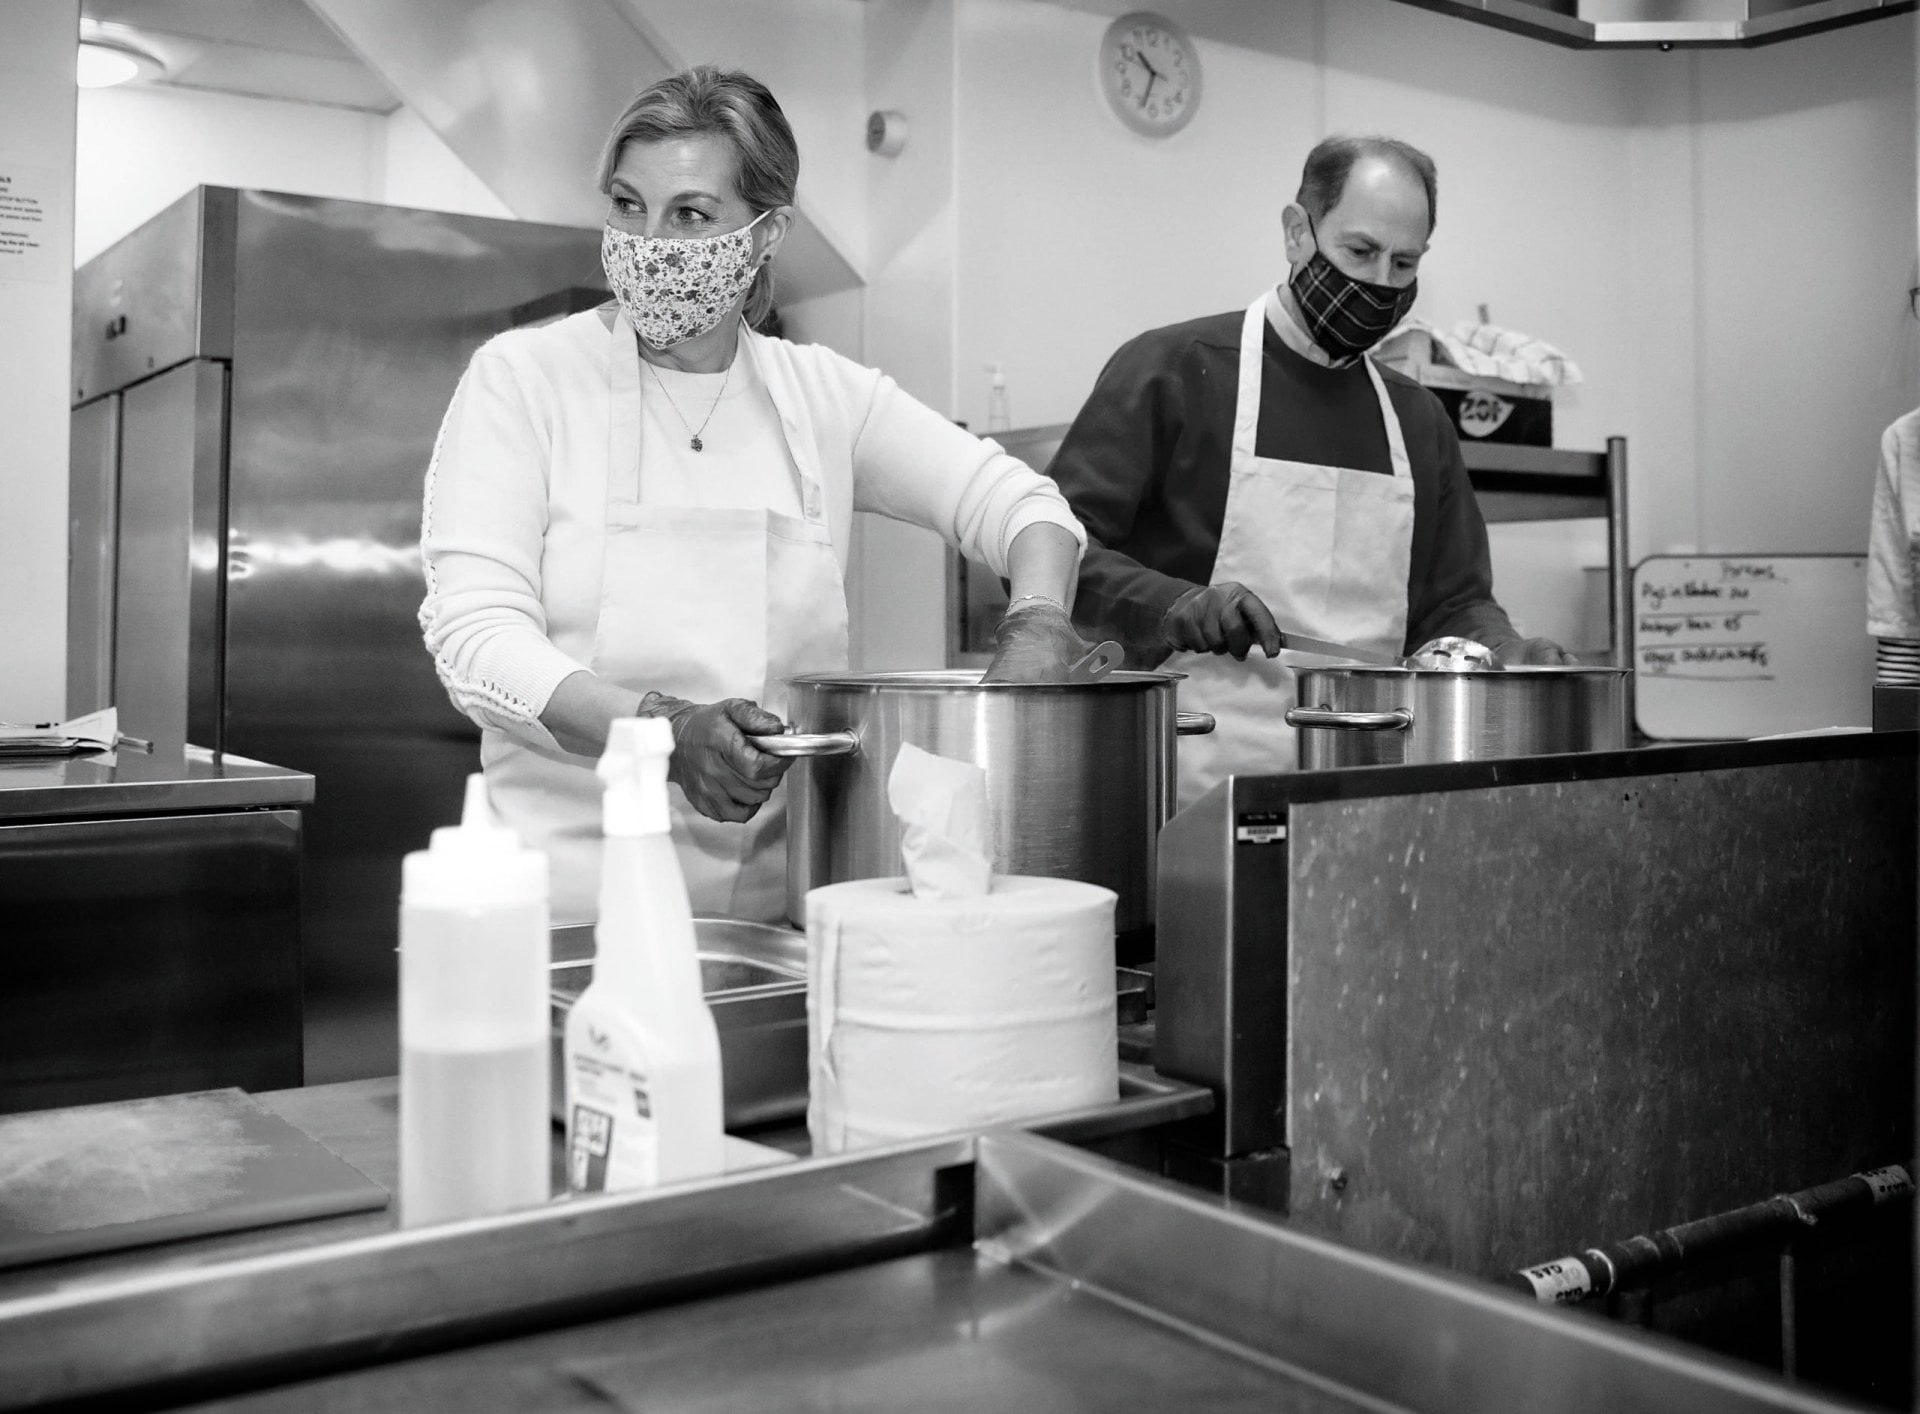 Black and white photo of countess Sophie, Countess of Wessex and Prince Edward cooking in the kitchen of a community centre